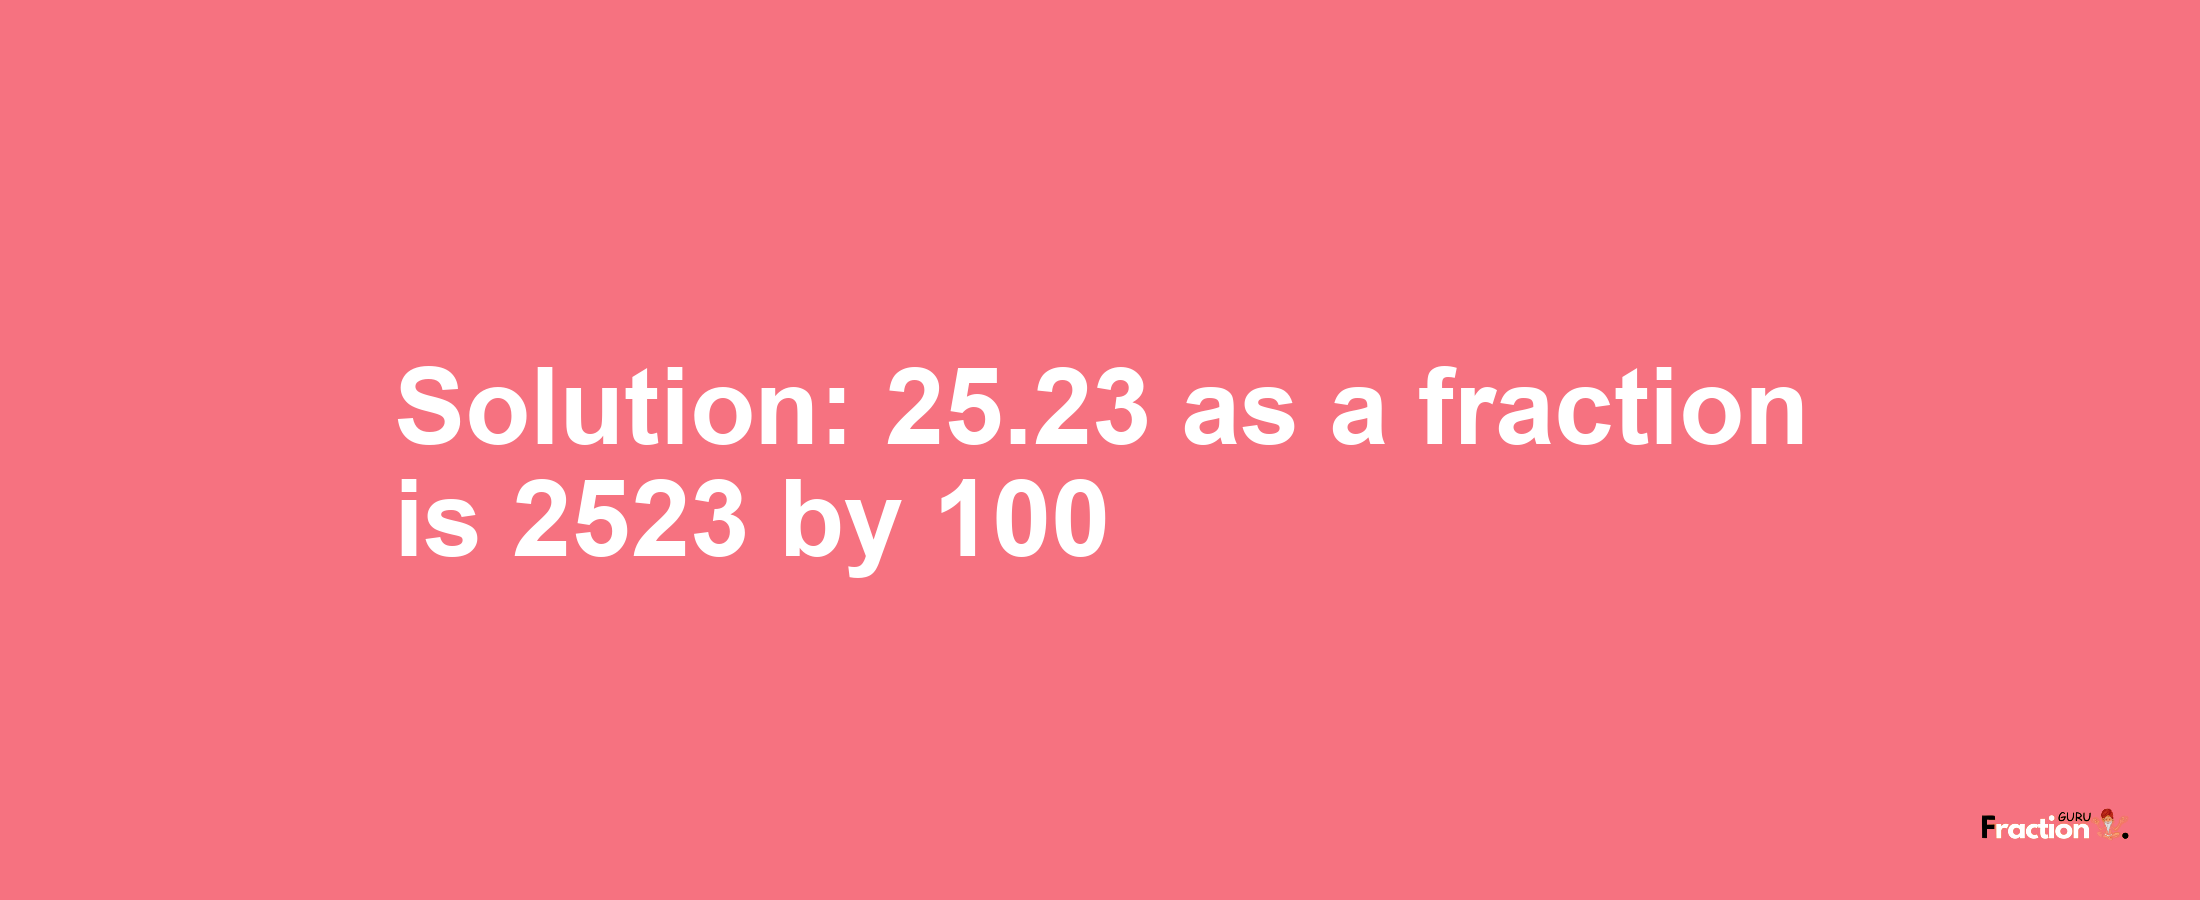 Solution:25.23 as a fraction is 2523/100